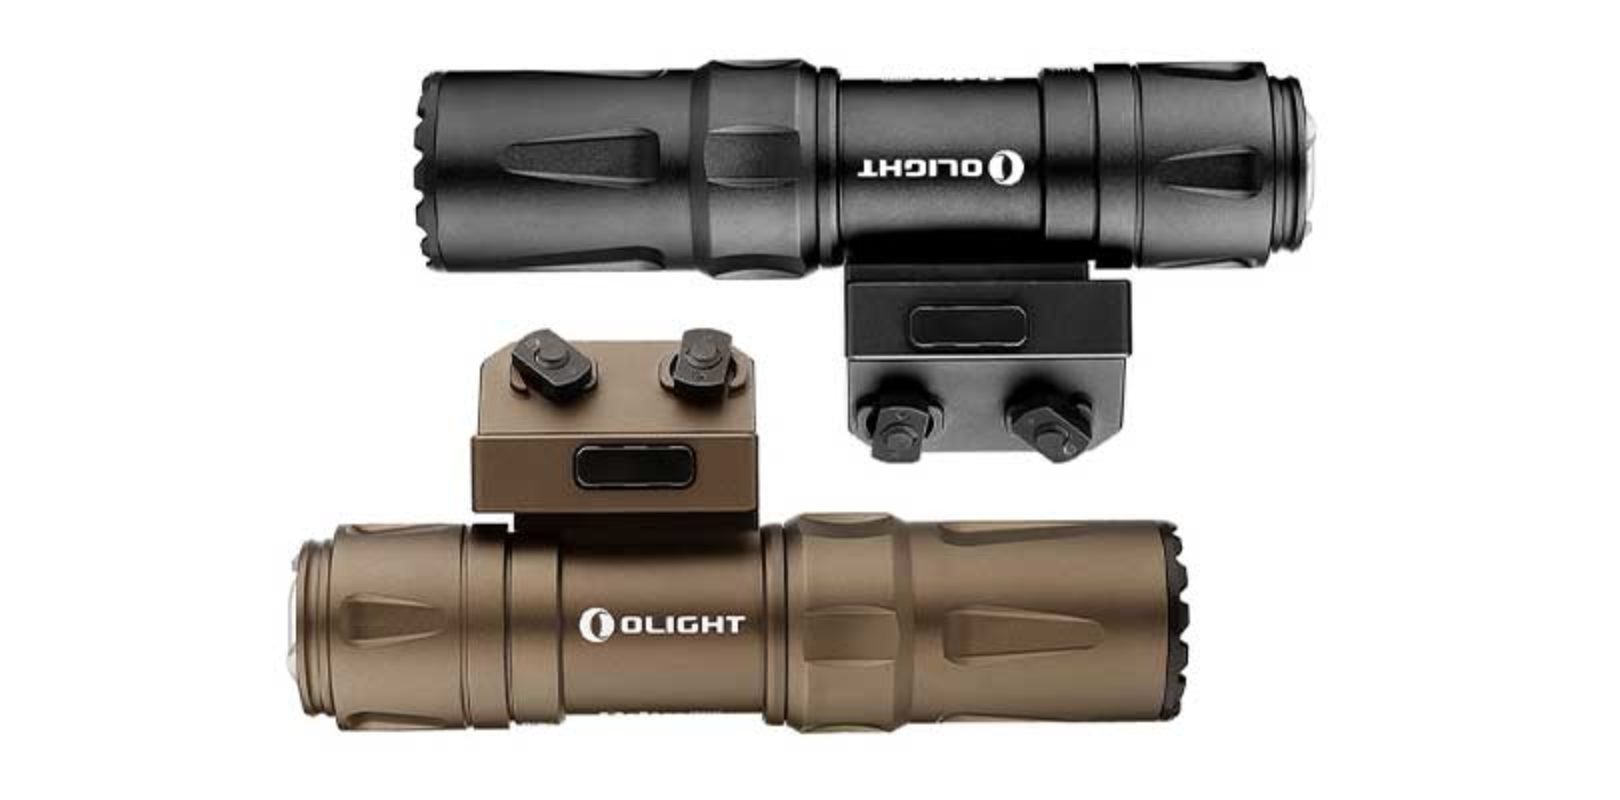 Details about   OLIGHT Odin Mini Rechargeable M-LOK Rail Mounted Tactical Light Remote switch DT 